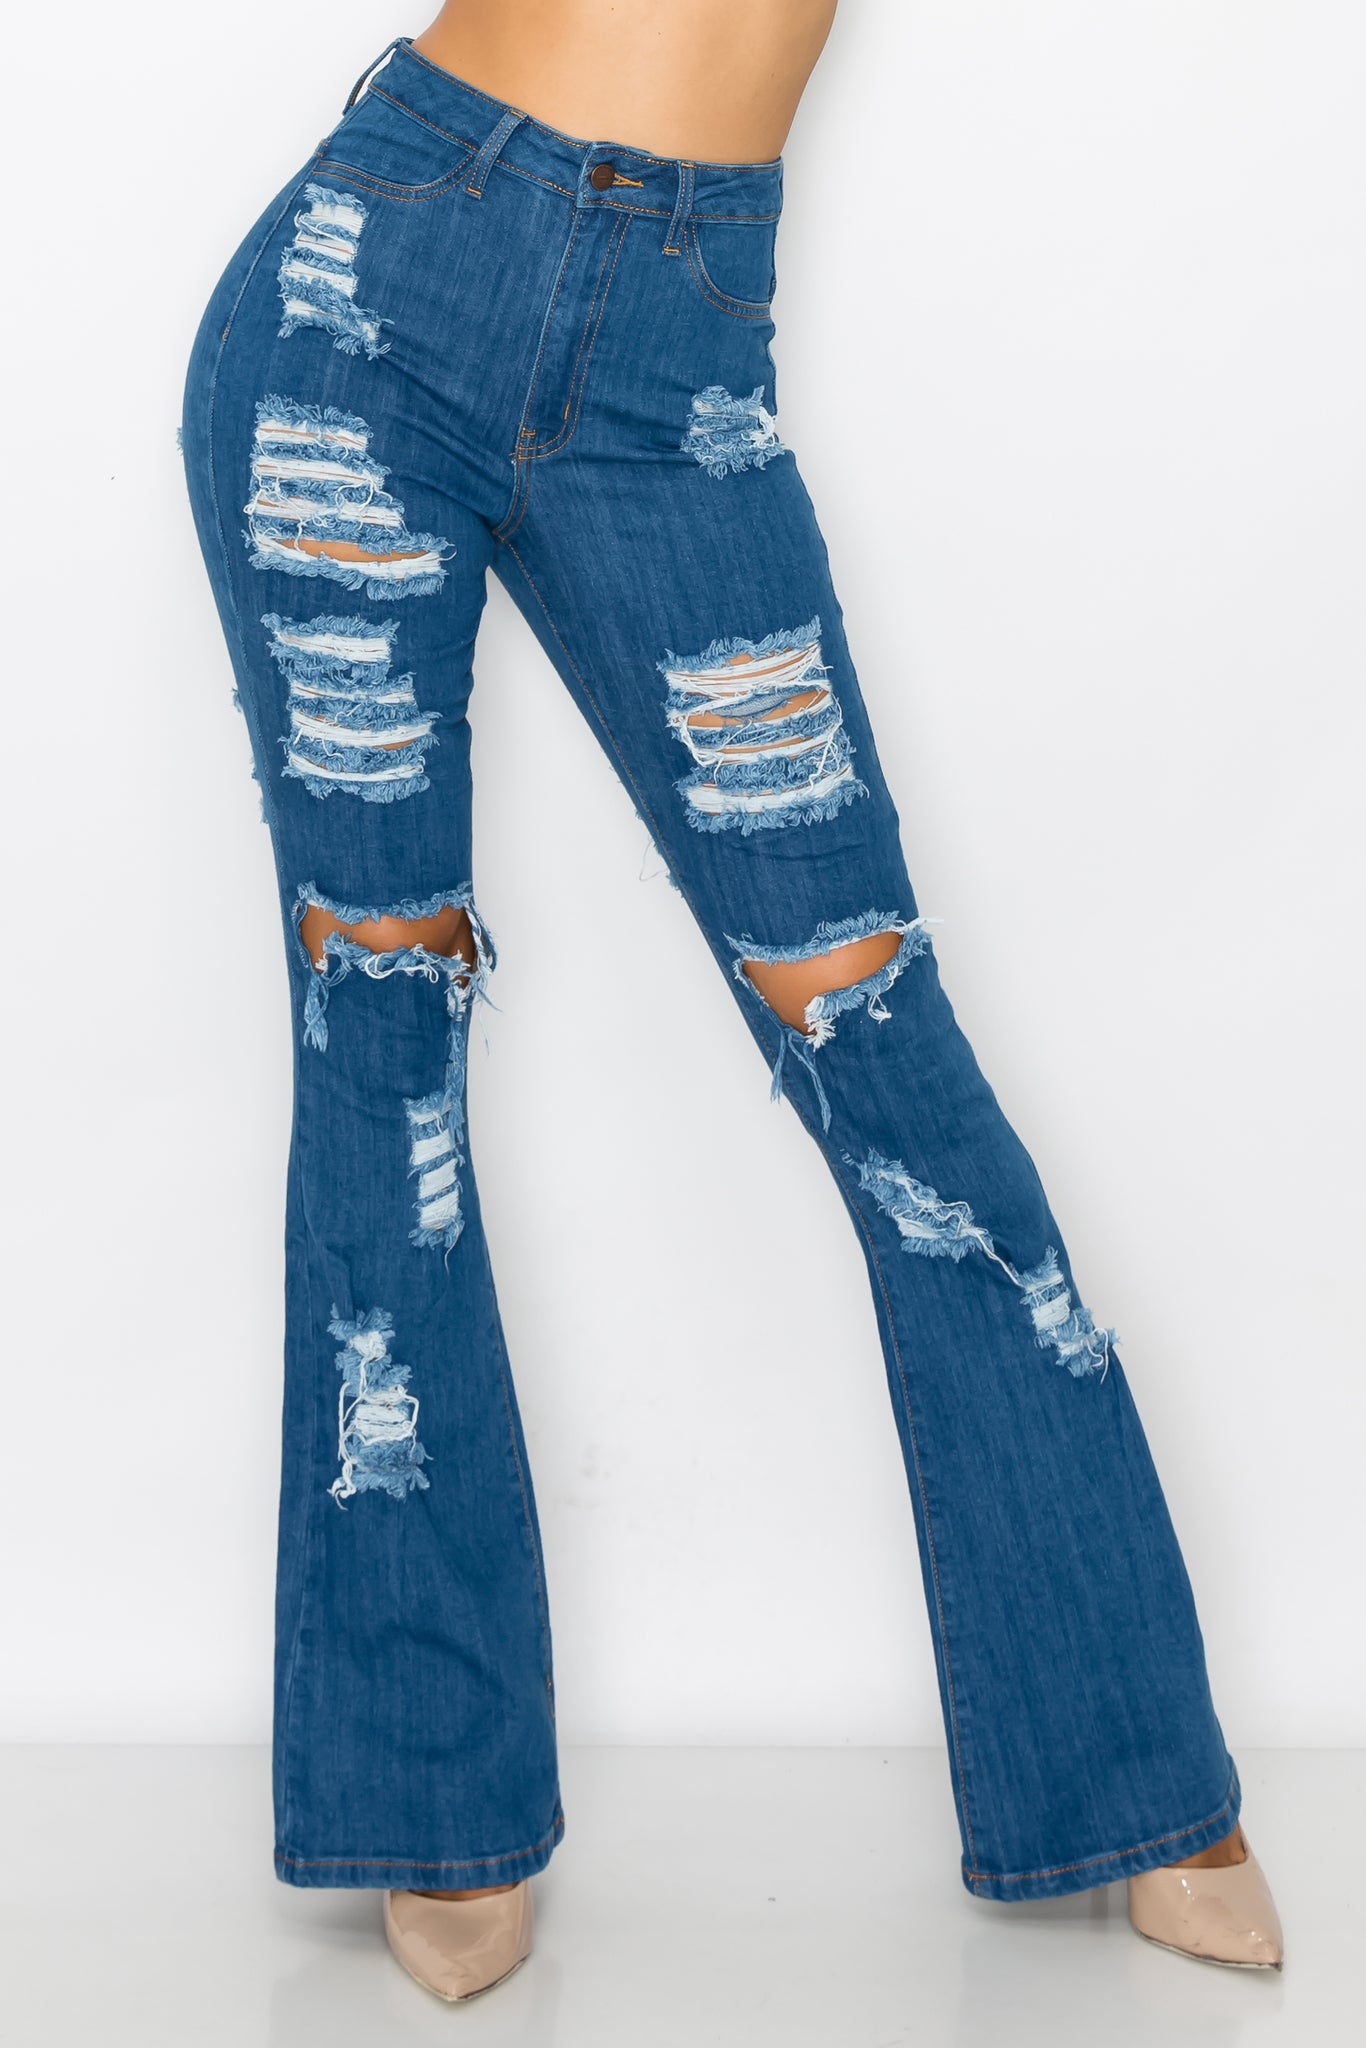 Womens Jeans - Ripped Jeans for Women & Flared Jeans - Matalan